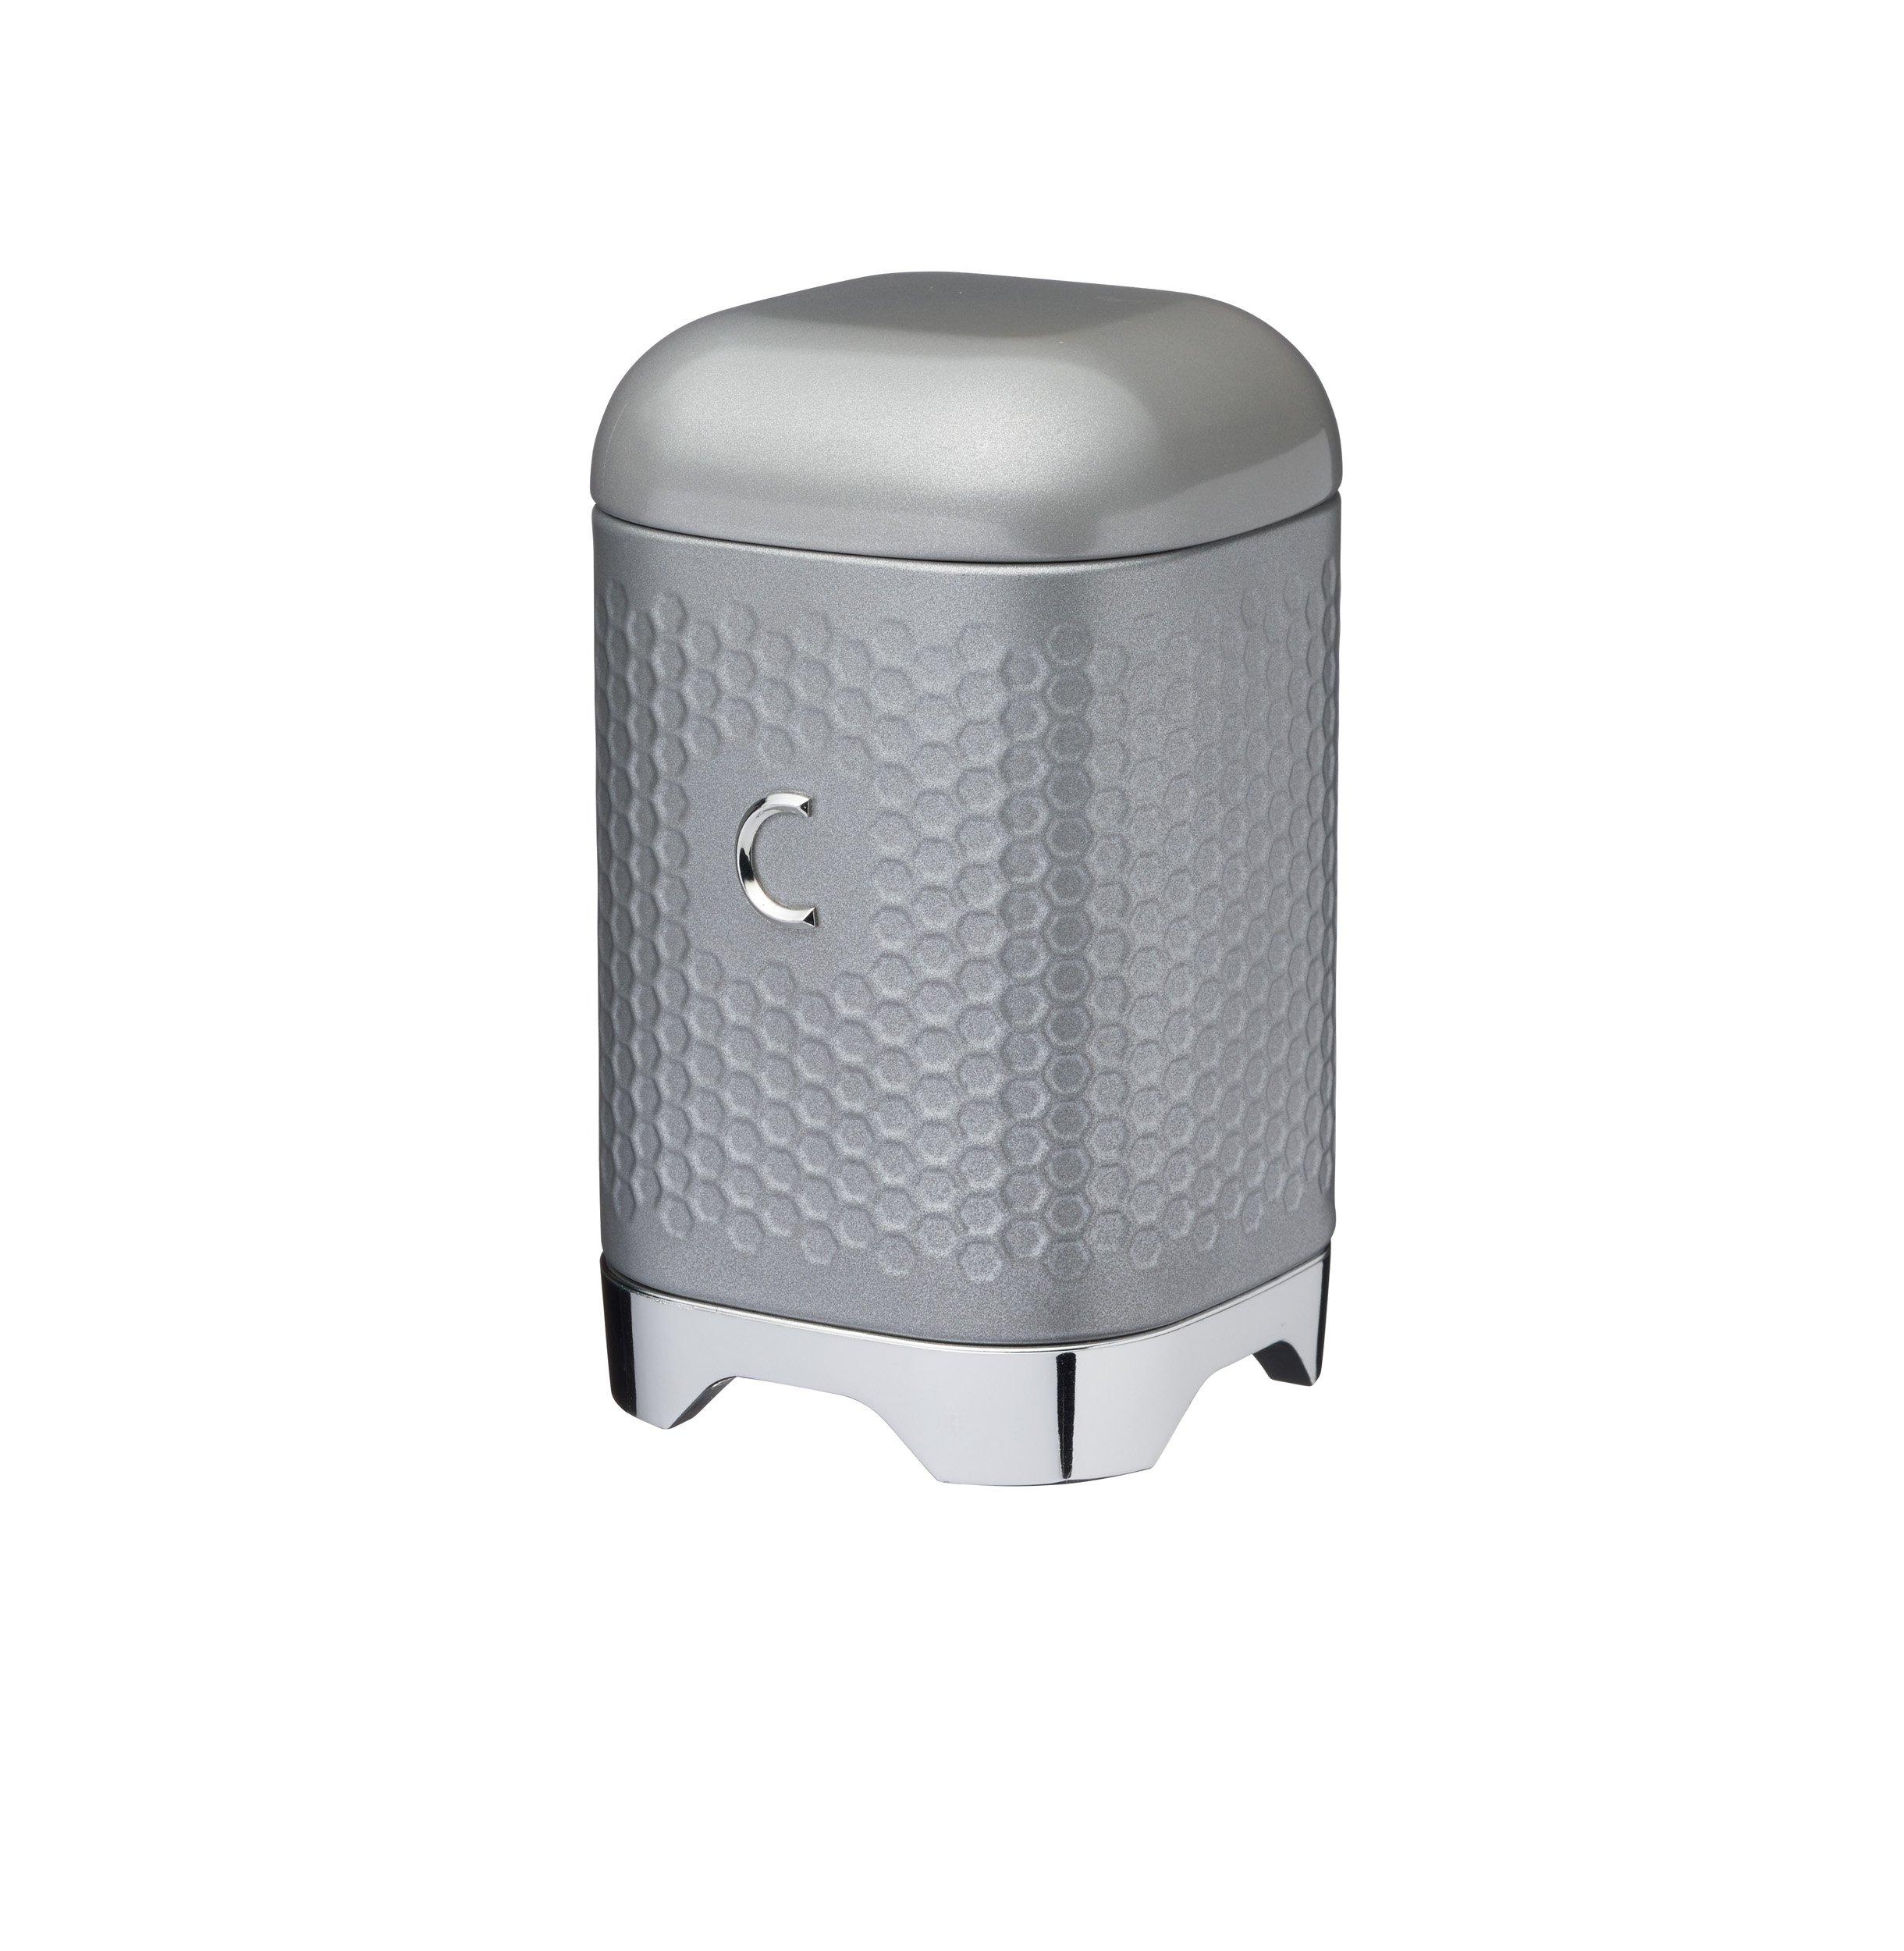 Lovello Shadow Grey Retro Coffee Canister with Geometric Textured Finish|grey